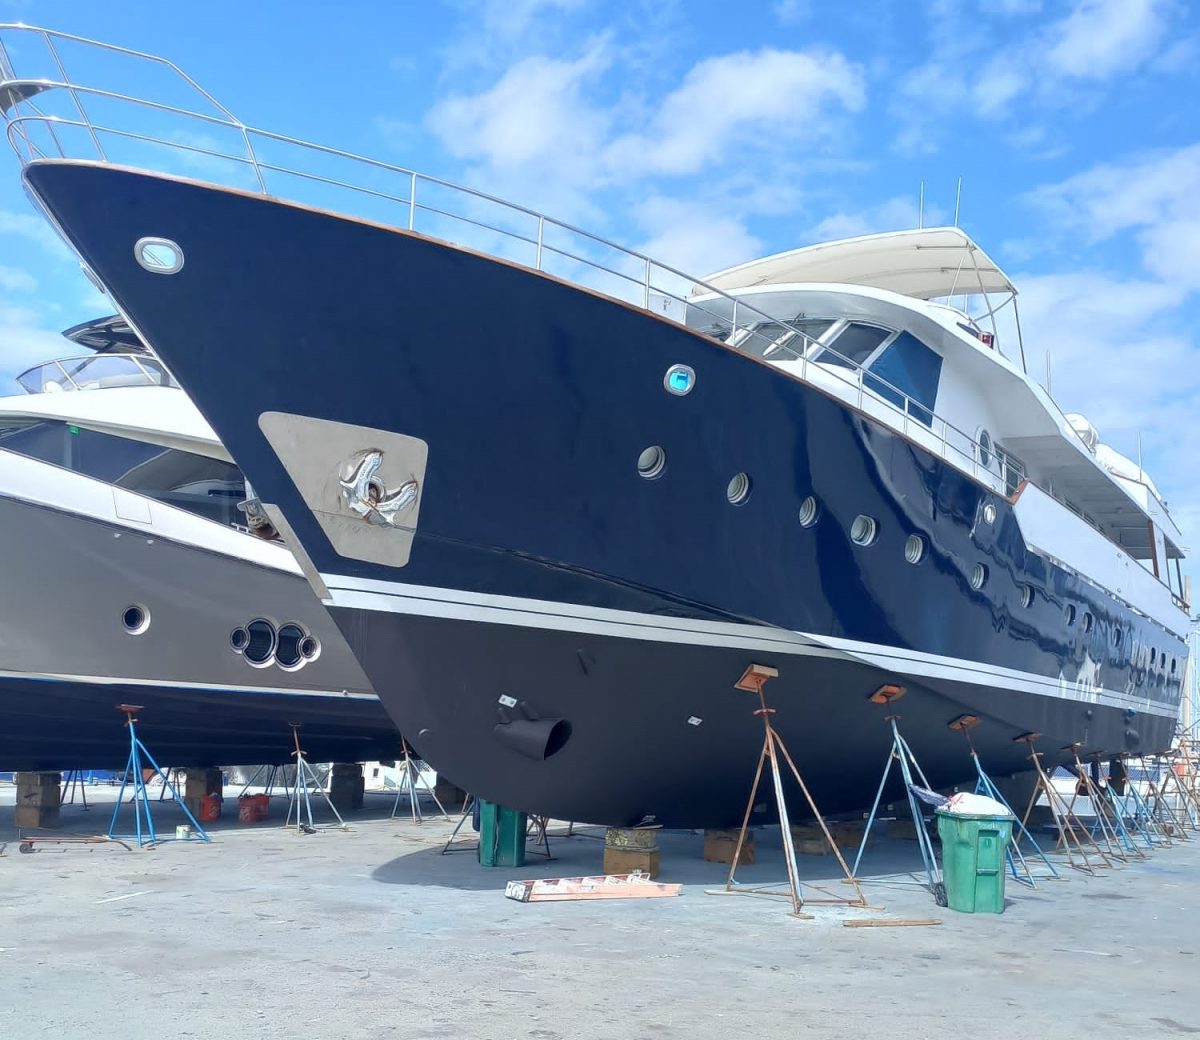 Dune currently at the shipyard at West Palm